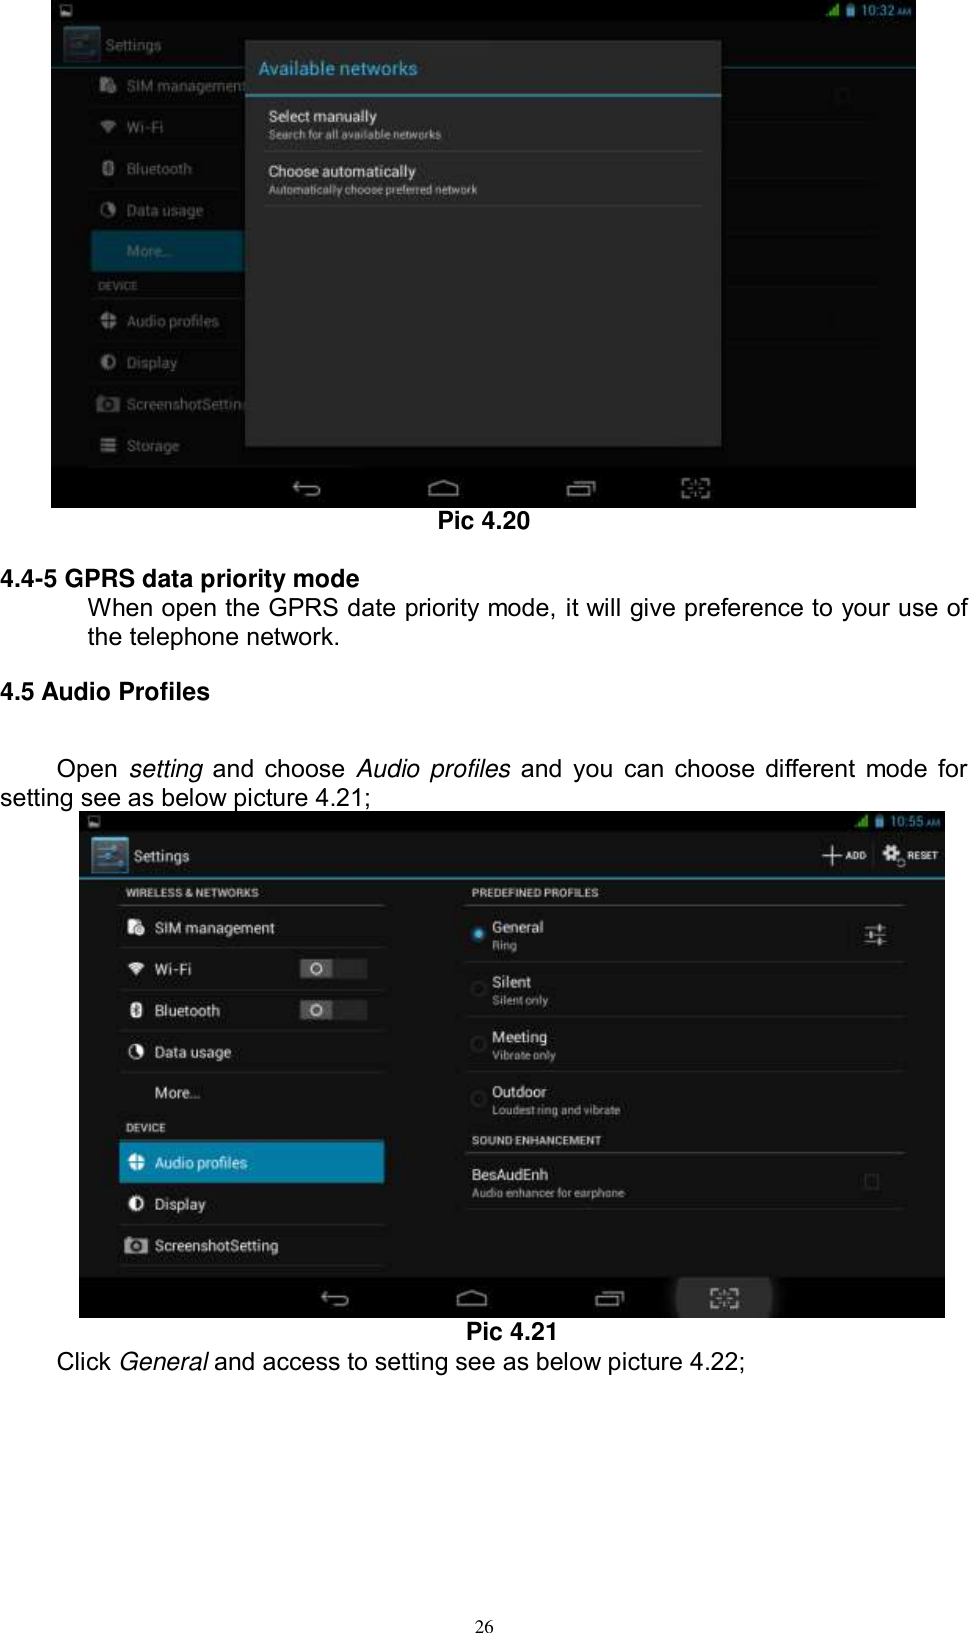      26  Pic 4.20  4.4-5 GPRS data priority mode When open the GPRS date priority mode, it will give preference to your use of the telephone network. 4.5 Audio Profiles   Open  setting and choose Audio profiles and you can choose different mode for setting see as below picture 4.21;  Pic 4.21 Click General and access to setting see as below picture 4.22; 